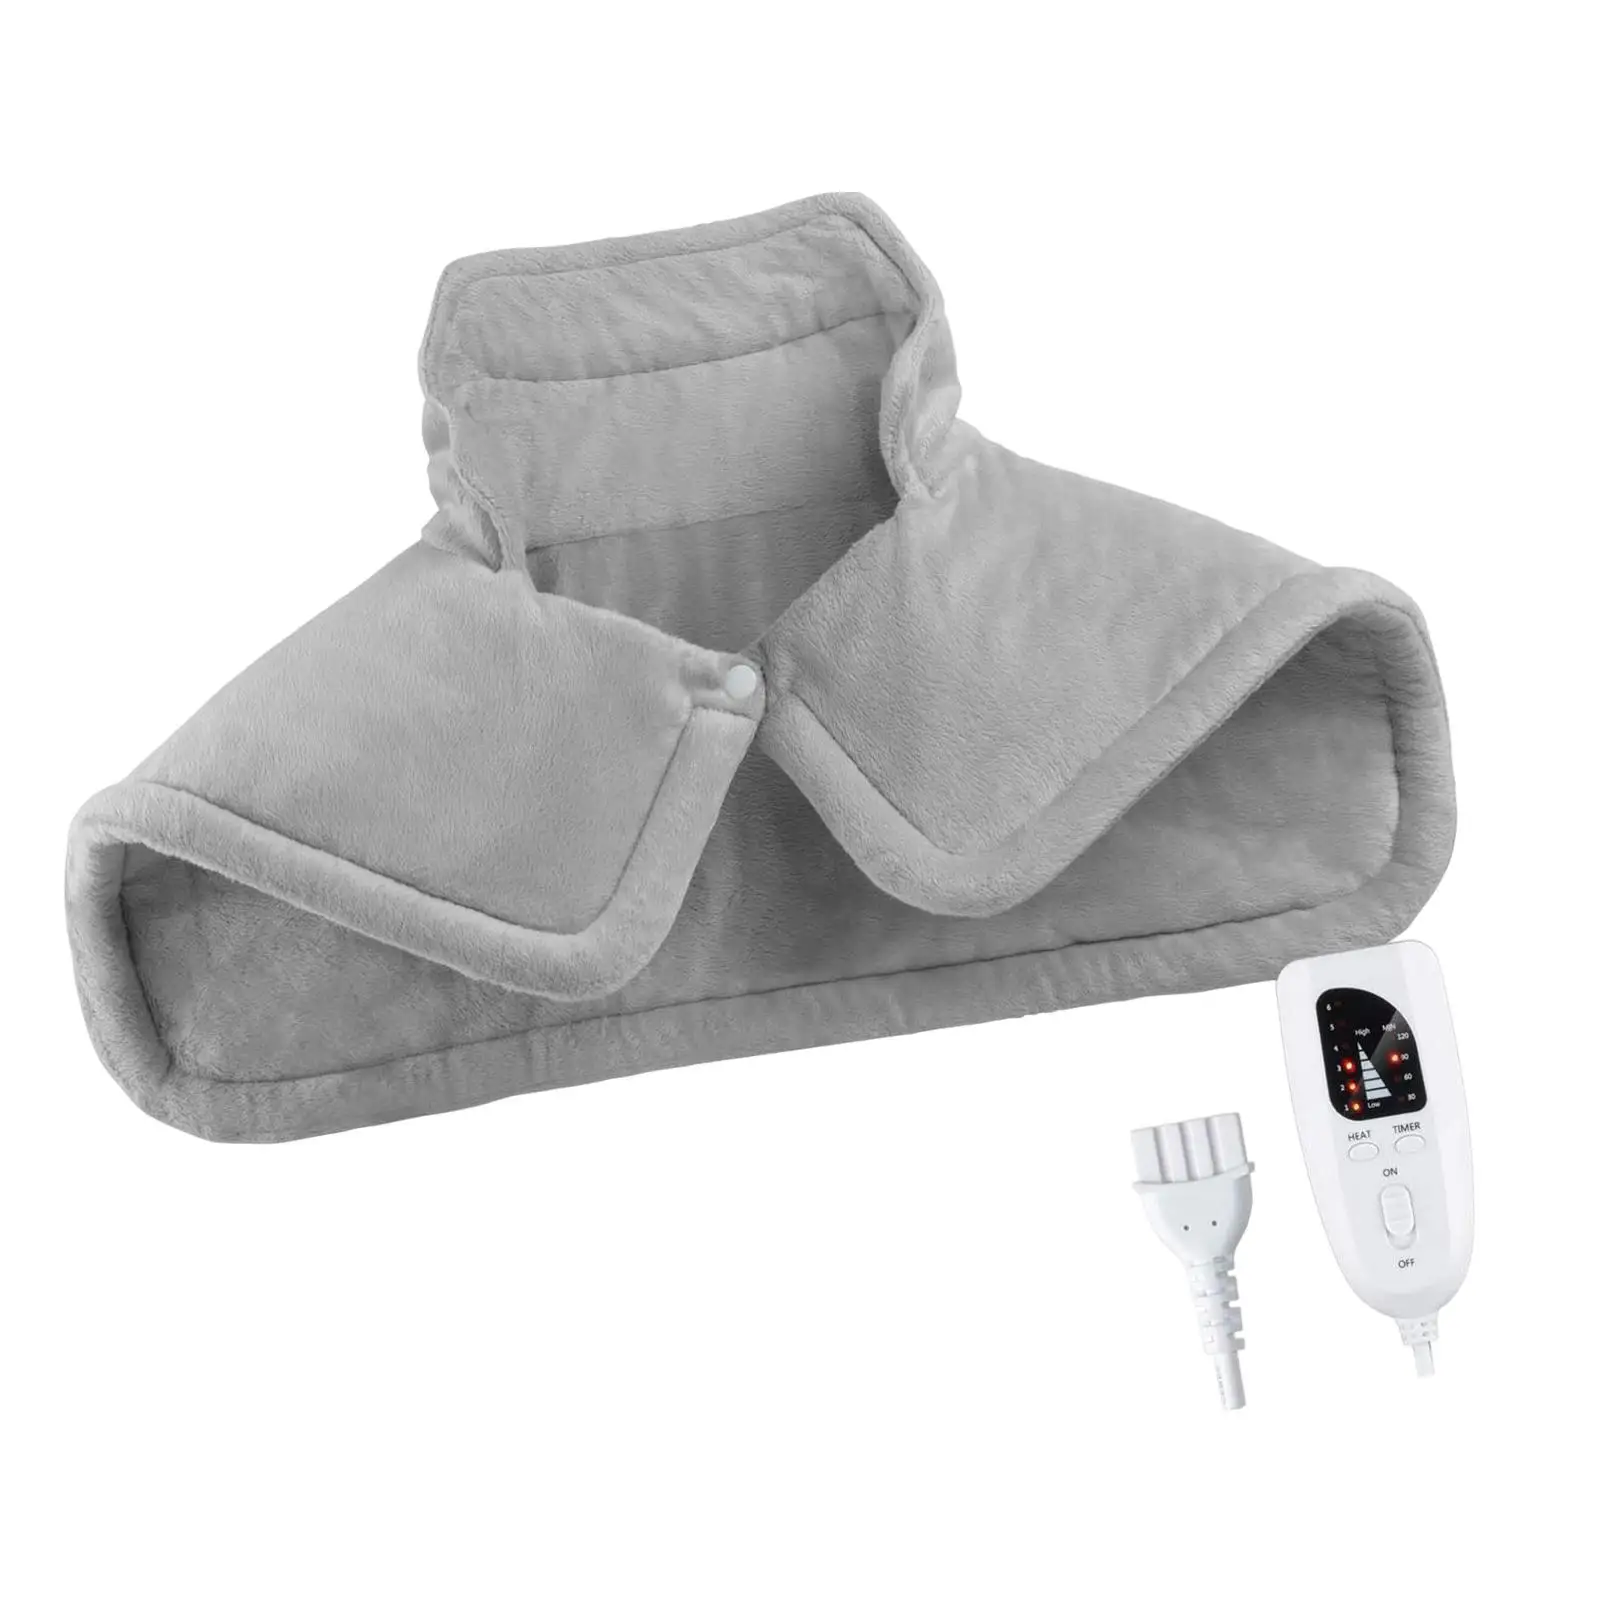 https://ae01.alicdn.com/kf/S4904e05143ca4ae6a9fee003e96720dek/Heating-Pad-for-Neck-and-Shoulder-Wearable-Heated-Wrap-Weighted-120V-Large-Warmer-6-Heat-Settings.jpg